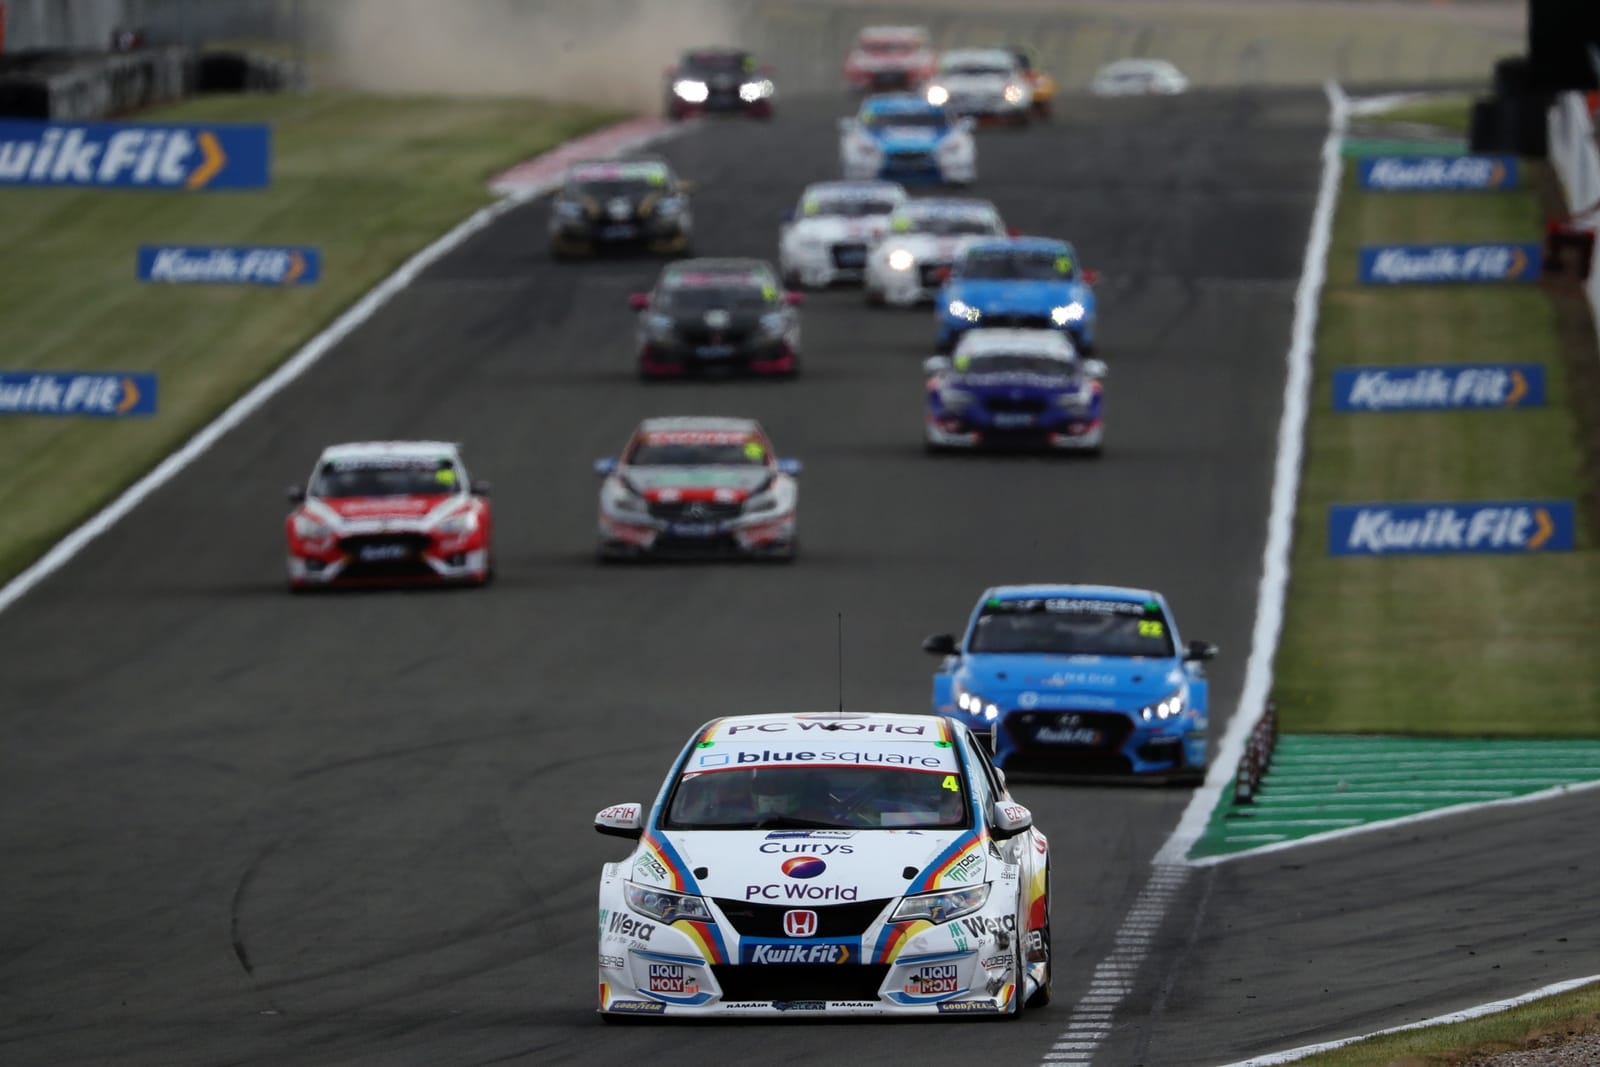 Mixed fortunes for MB Motorsport accelerated by Blue Square in Donington Park opener